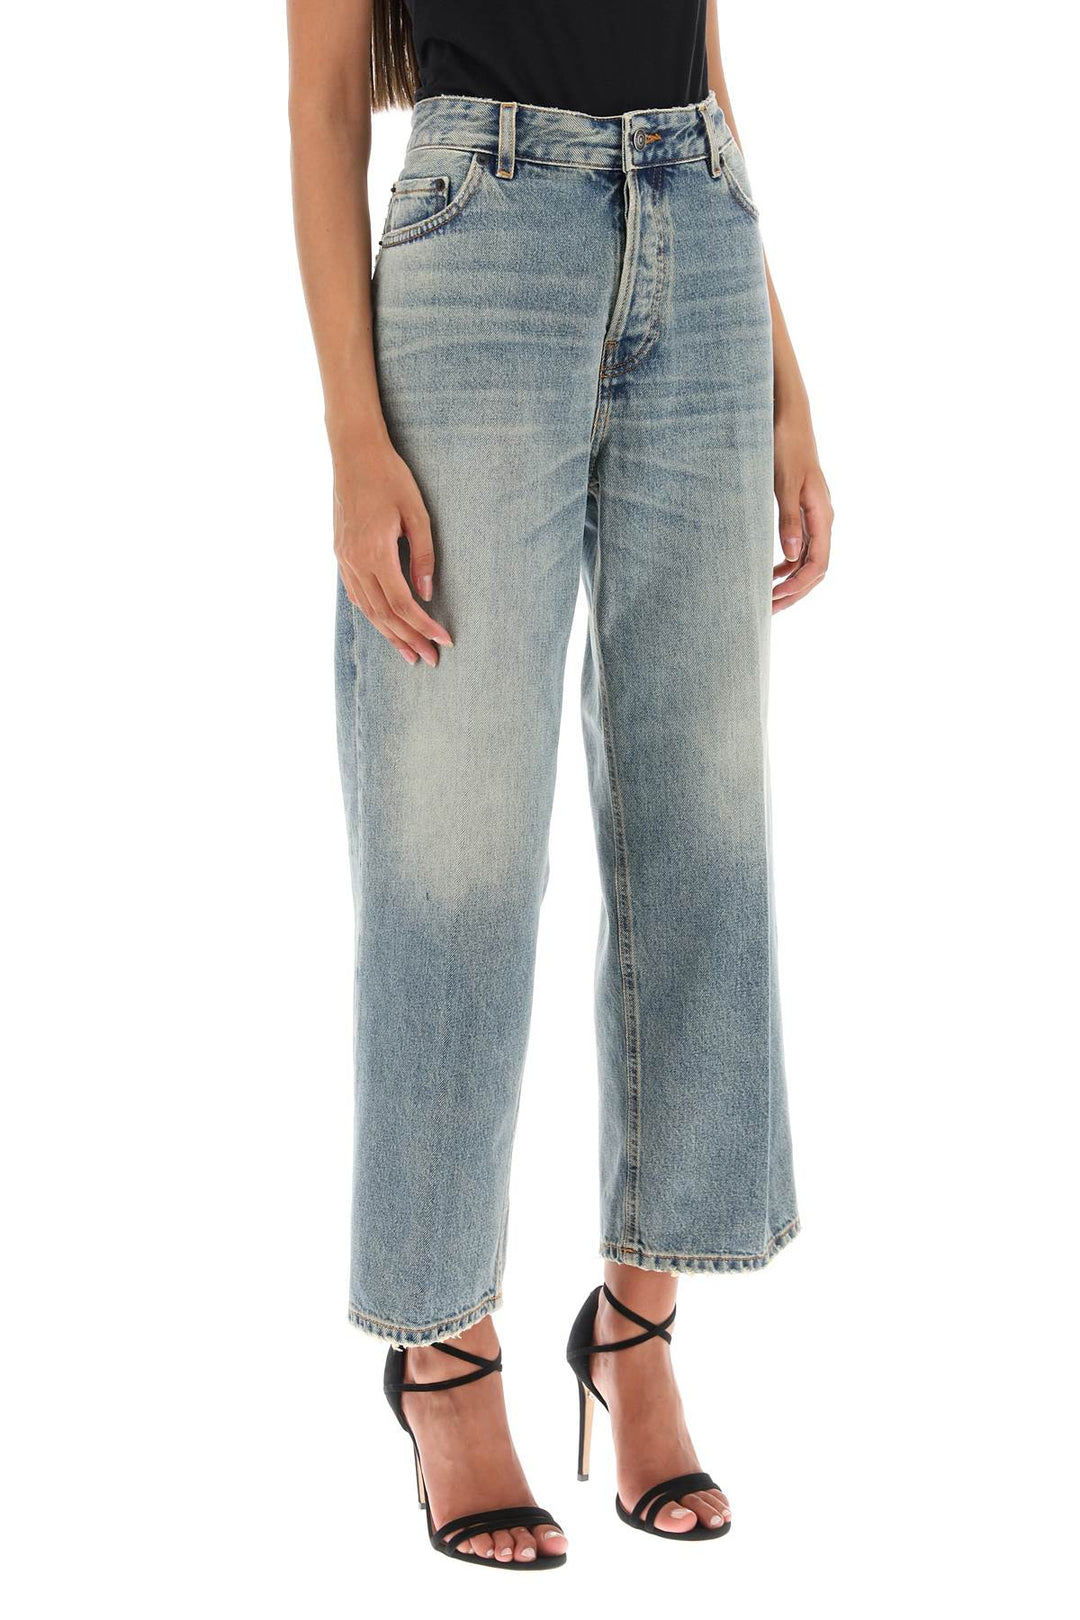 Haikure 'Betty' Cropped Jeans With Straight Leg   Celeste